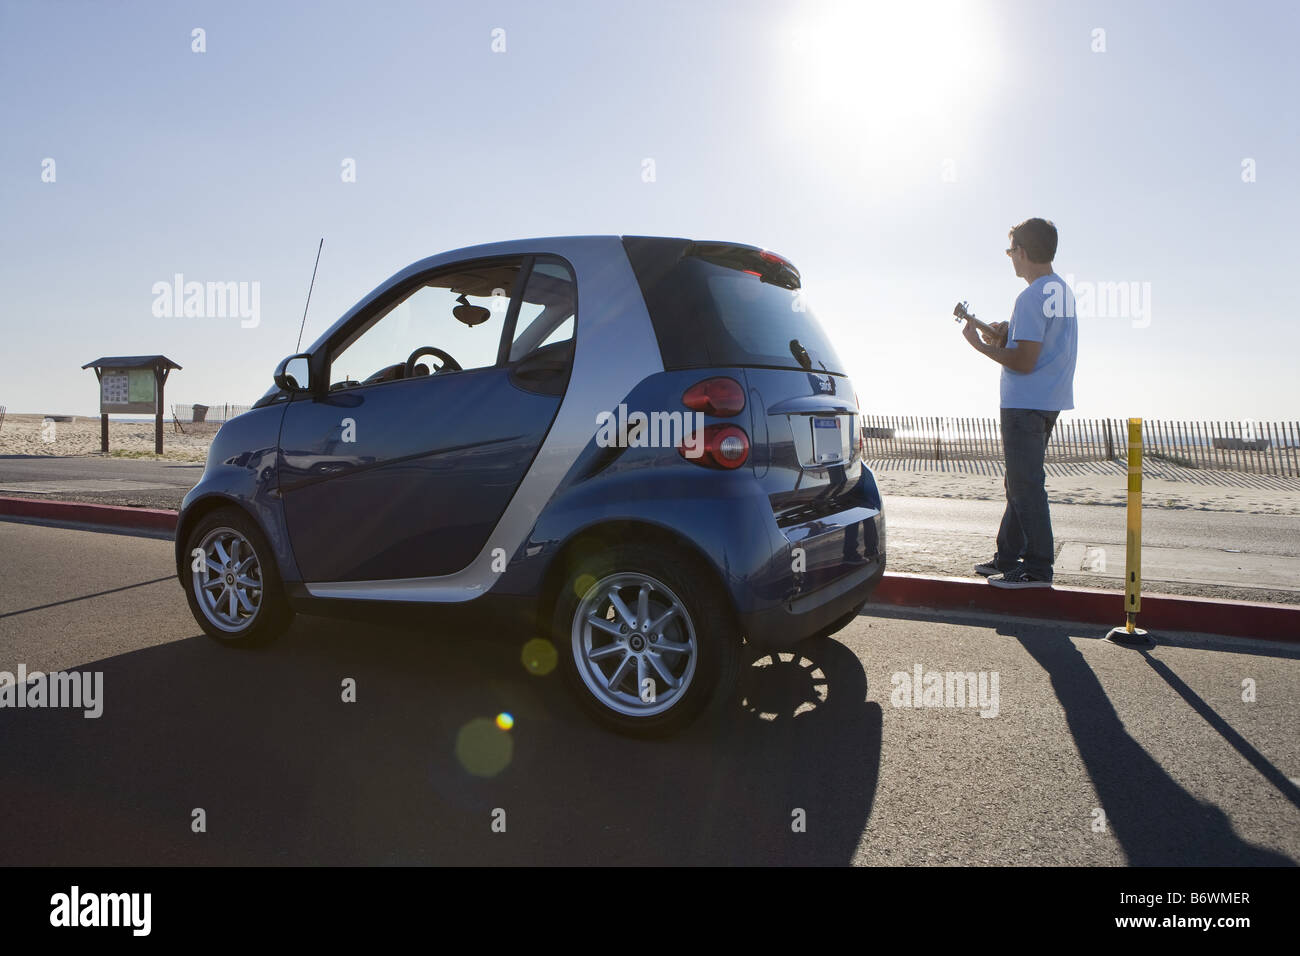 Young man standing by Smartcar at beach Stock Photo